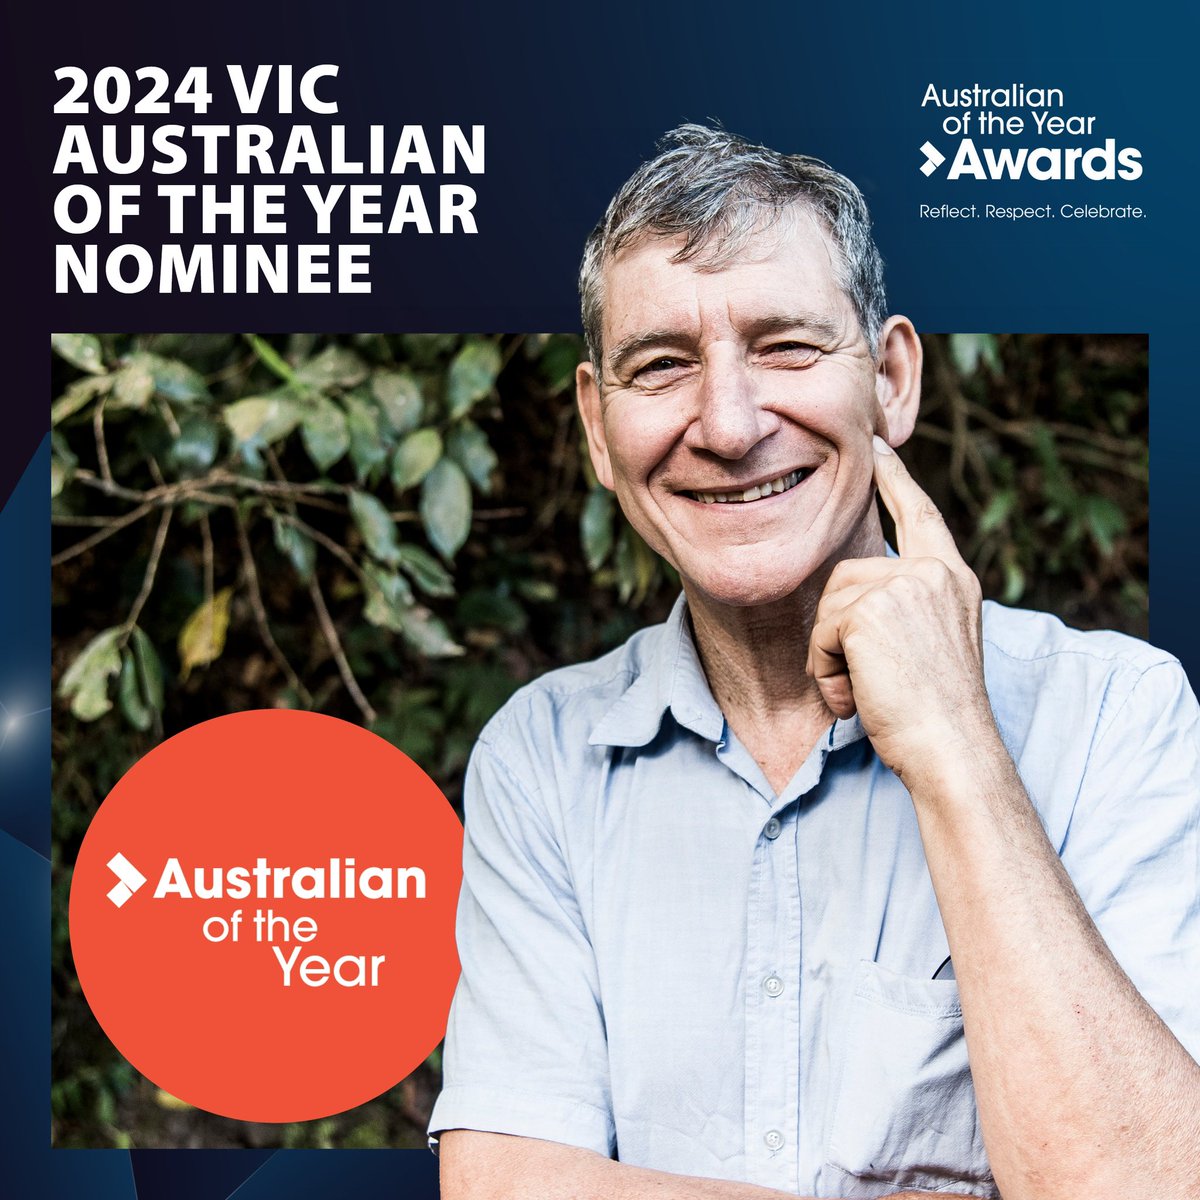 Huge congratulations to our very own tree whisperer Tony Rinaudo AM for being chosen as a nominee for 2024 Australian of Year. Tune into australianoftheyear.org.au 14 November from 6.45 pm (AEDT) for the announcement!  #ausoftheyear #reflectrespectcelebrate #wereallpartofthestory